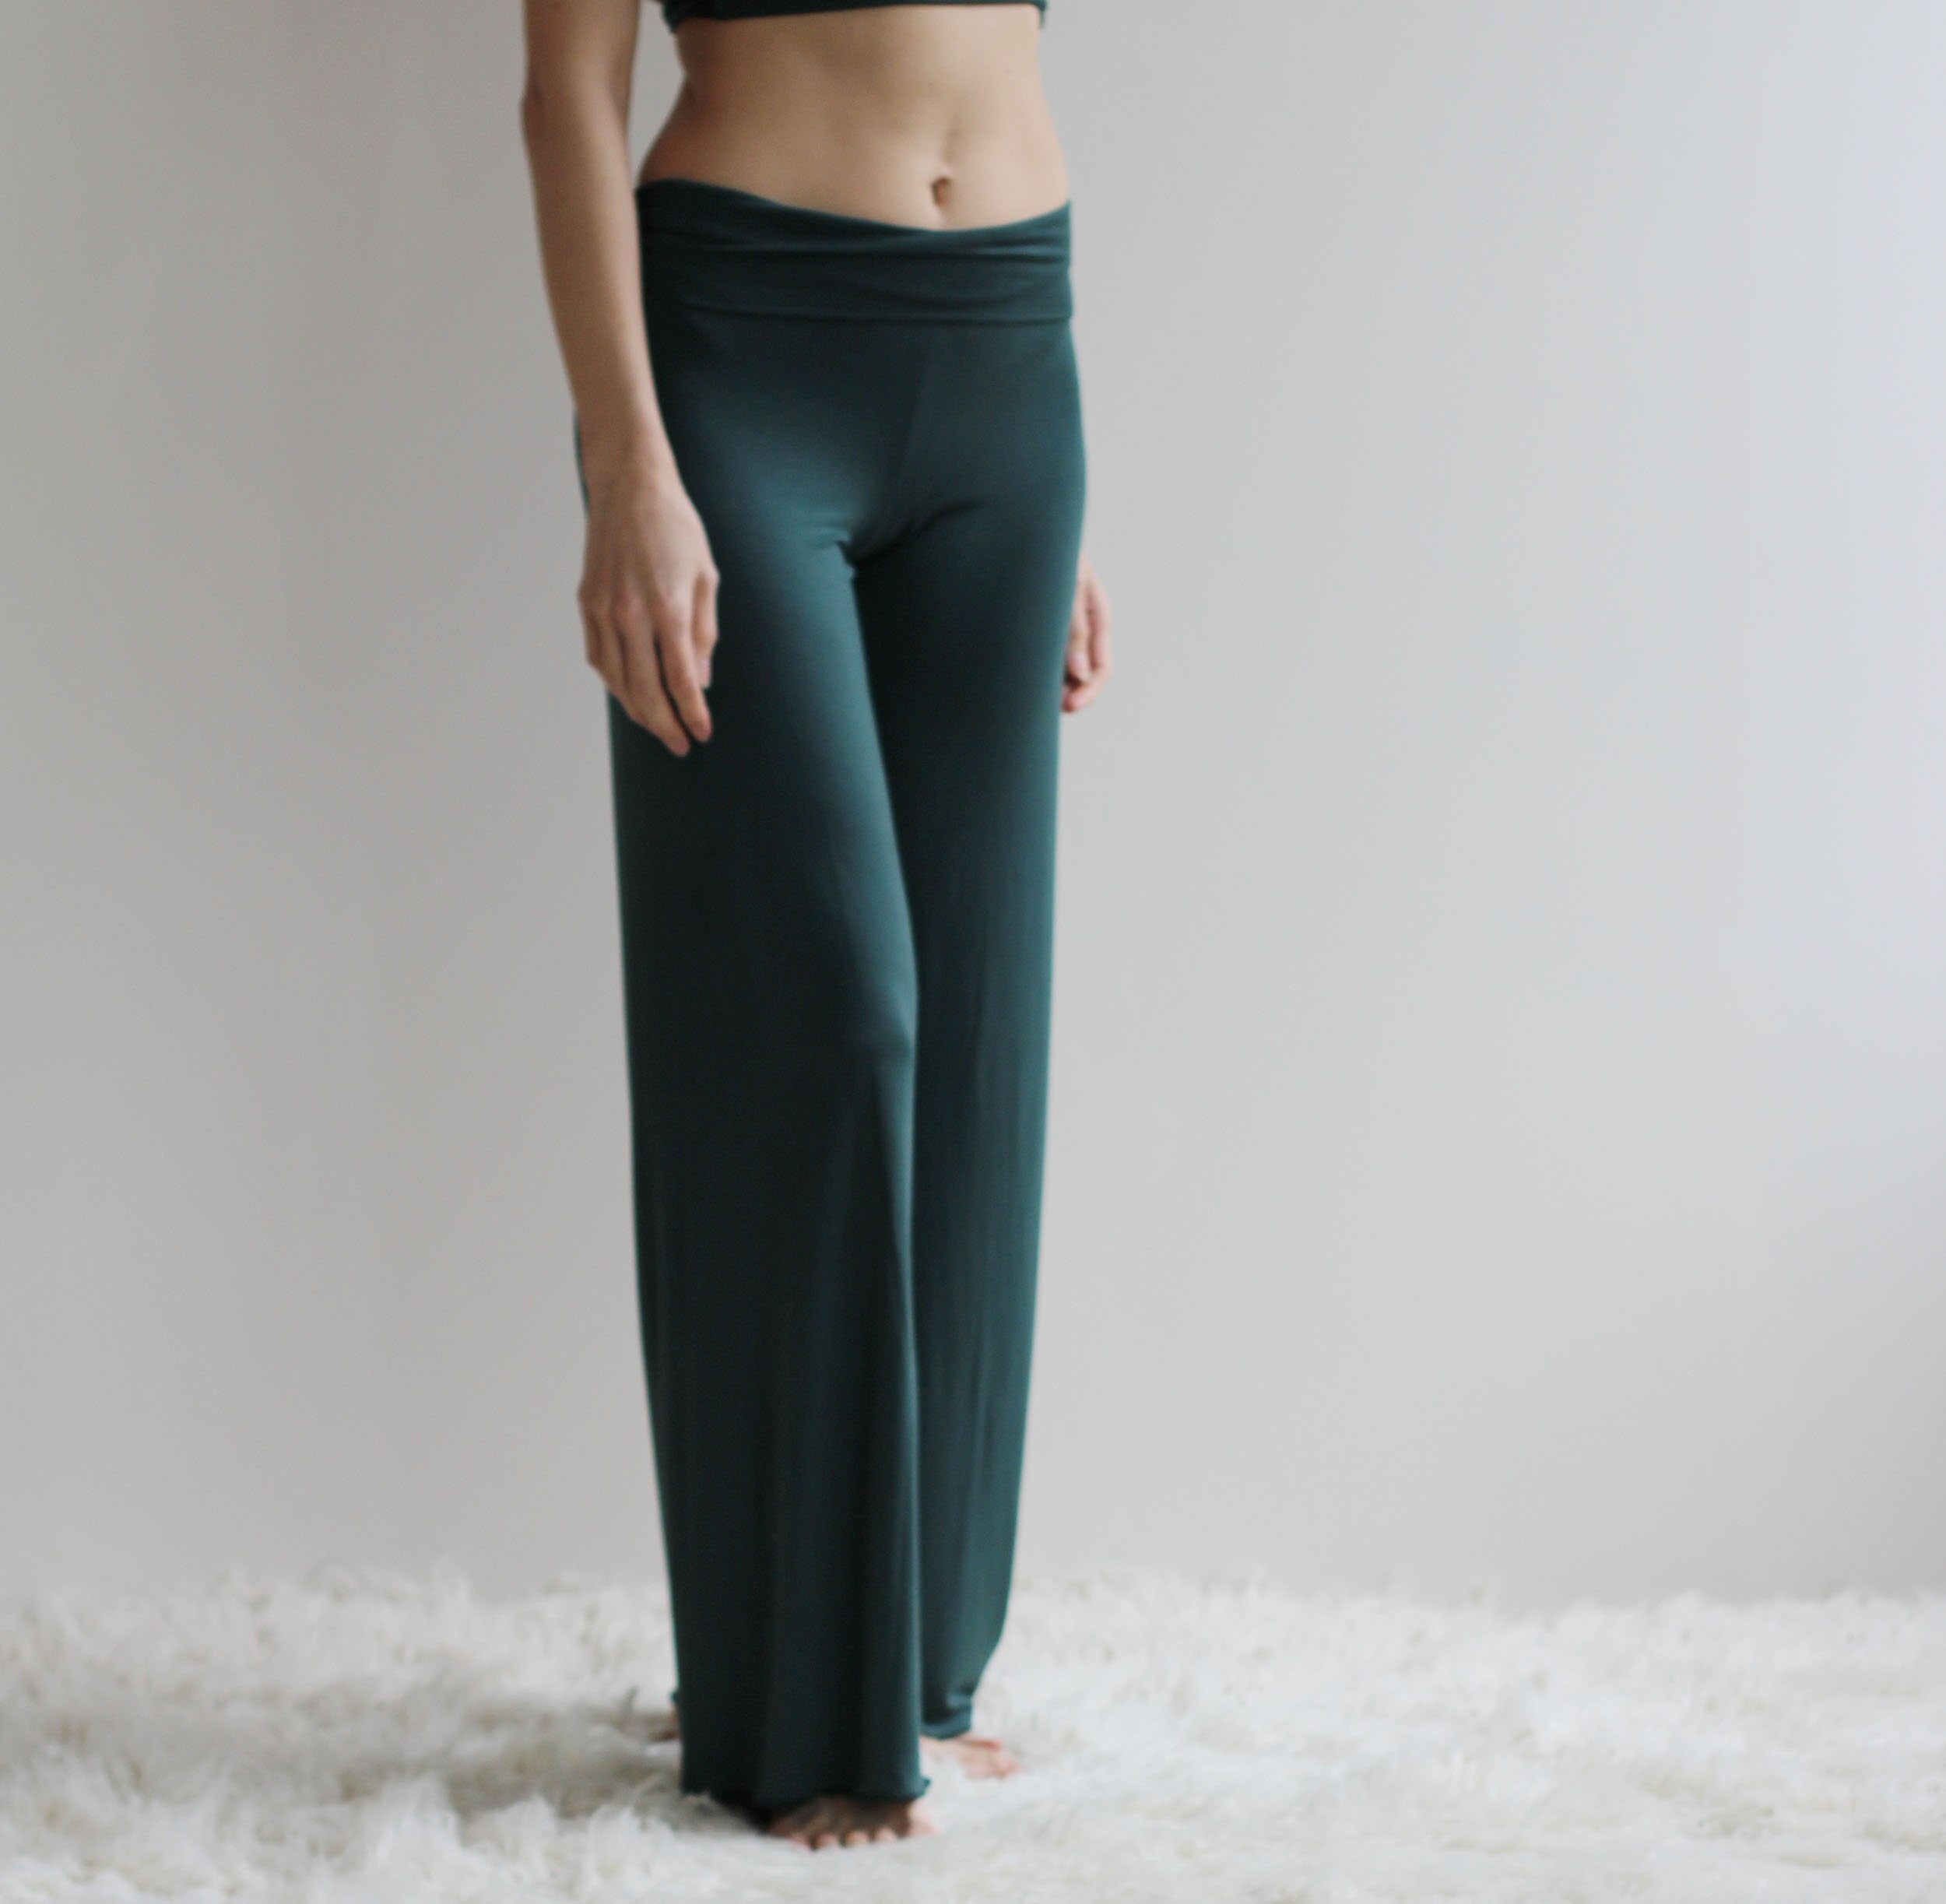 bamboo foldover lounge pants with a wide leg, pajama pants, bamboo pj's, yoga pants, Ready to Ship, various Sizes, Forest Green